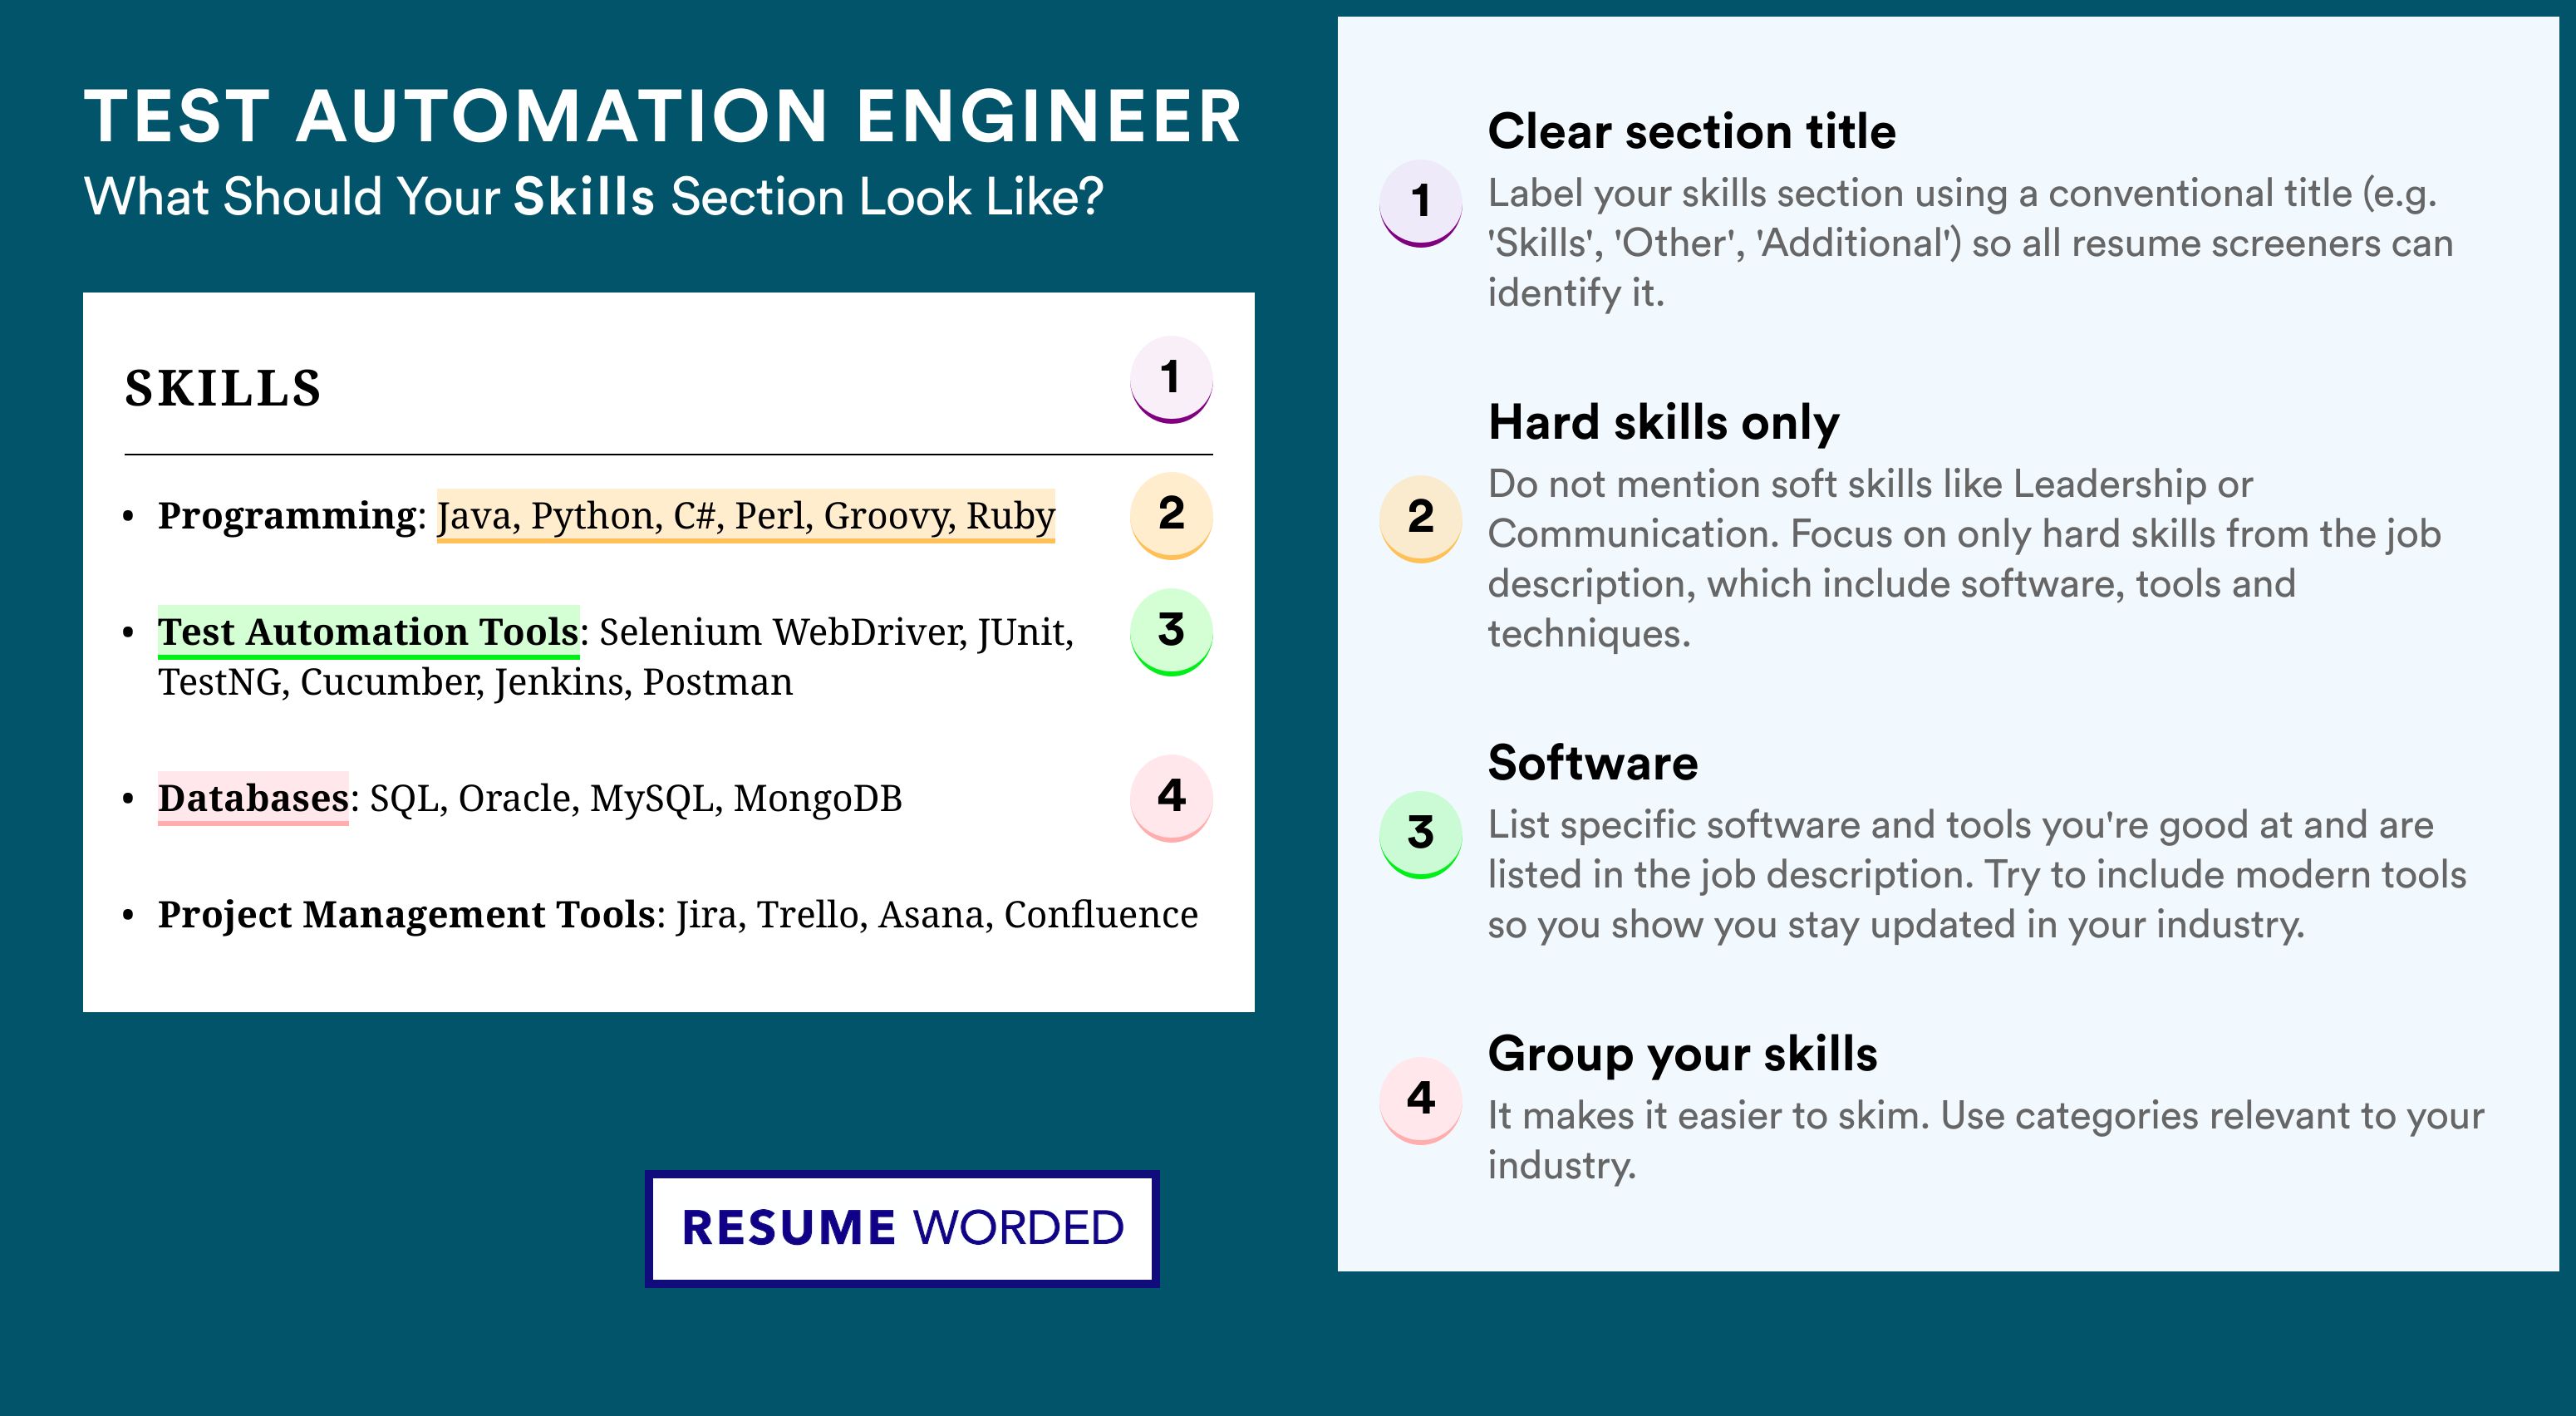 How To Write Your Skills Section - Test Automation Engineer Roles